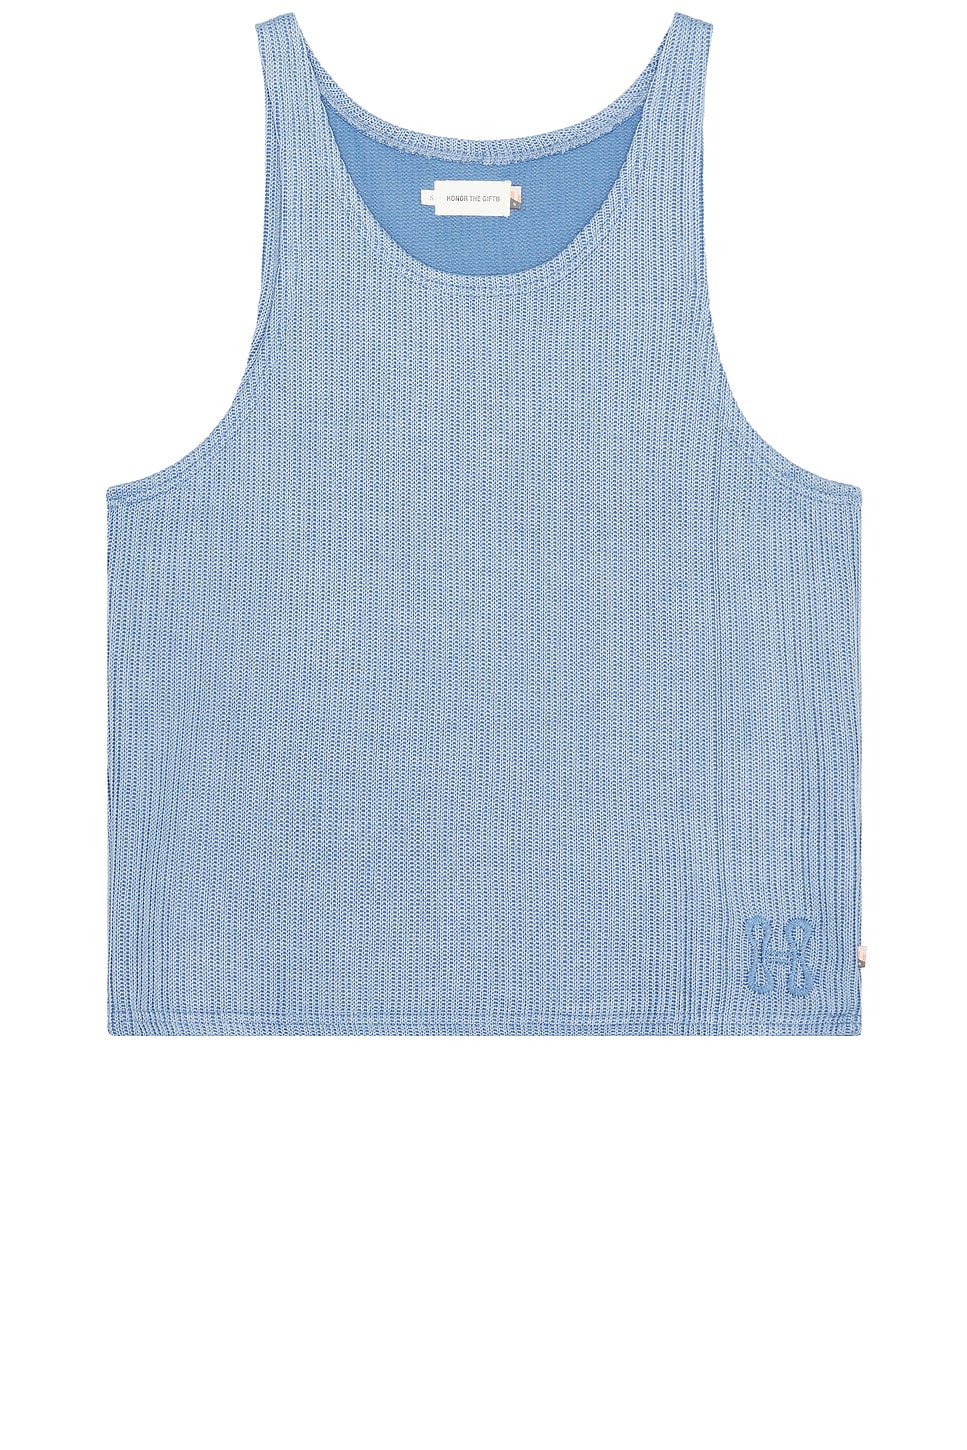 Image 1 of Honor The Gift Knit Tank Top in Blue